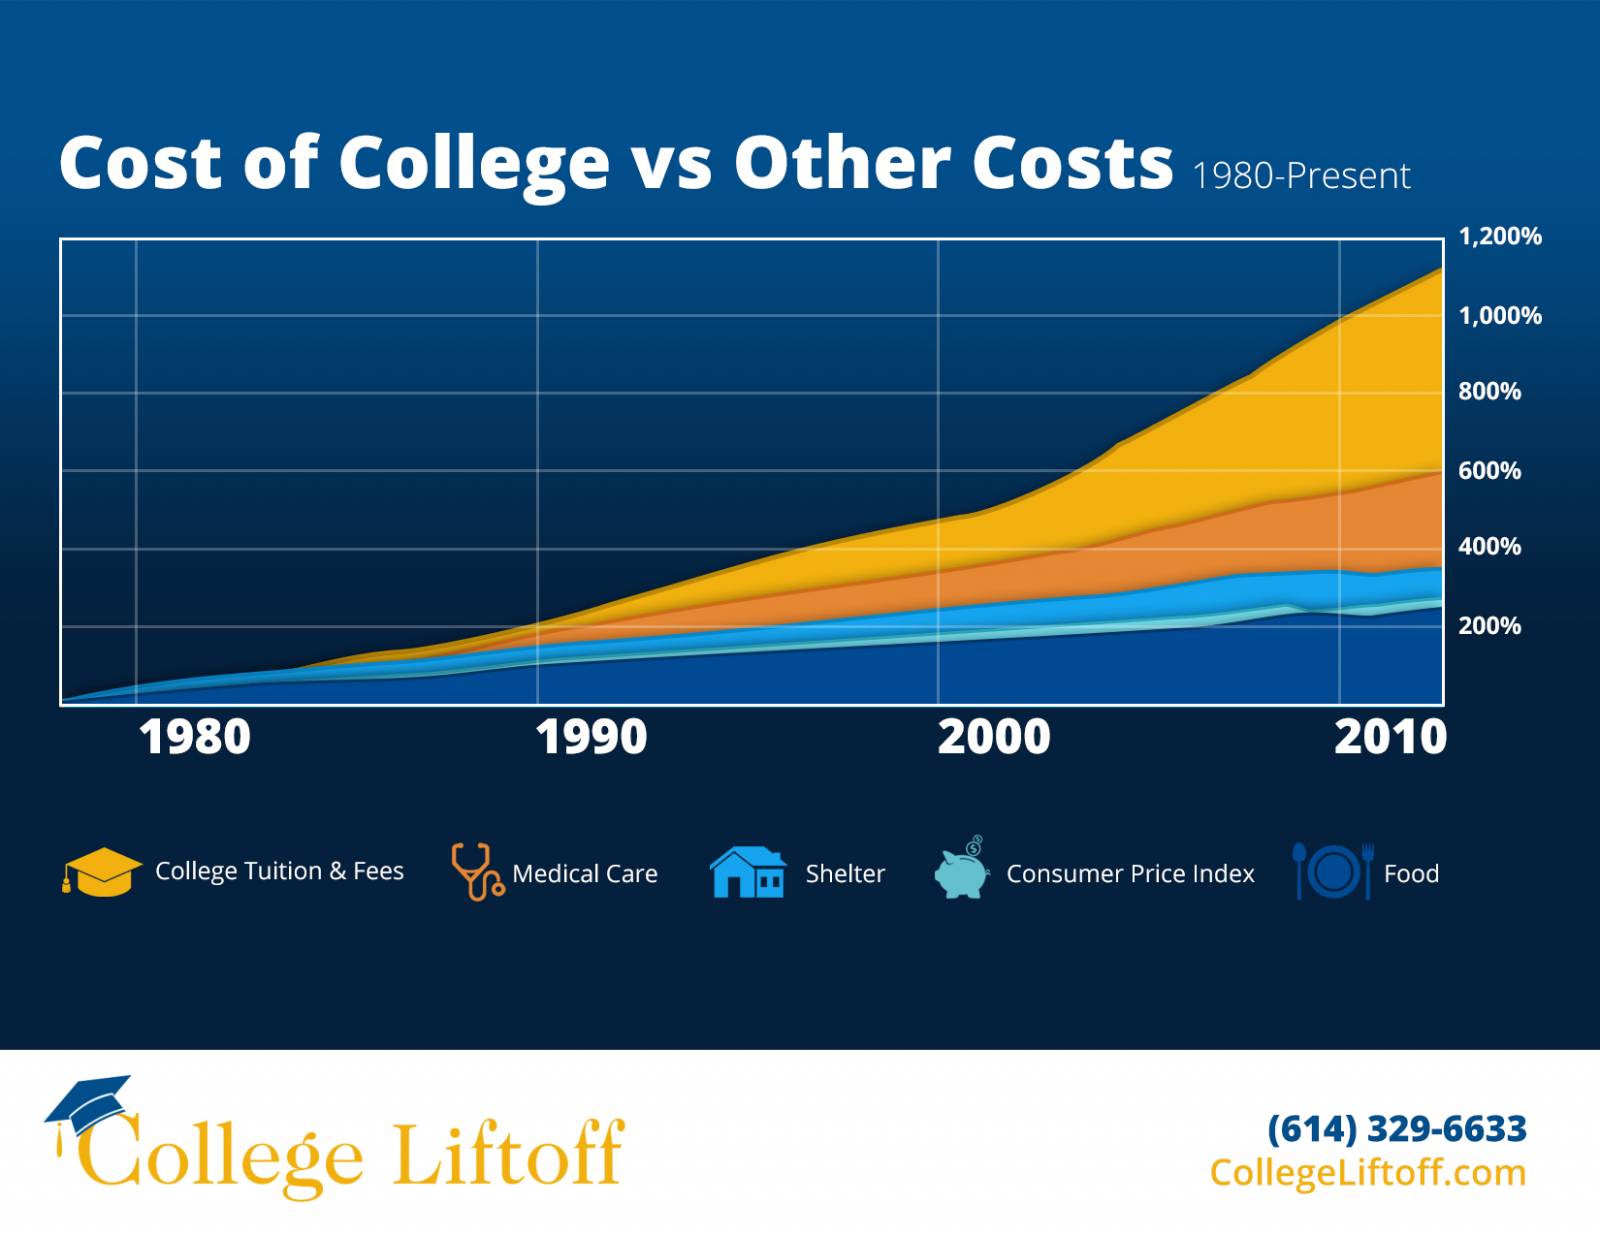 College Liftoff Cost of College Infographic